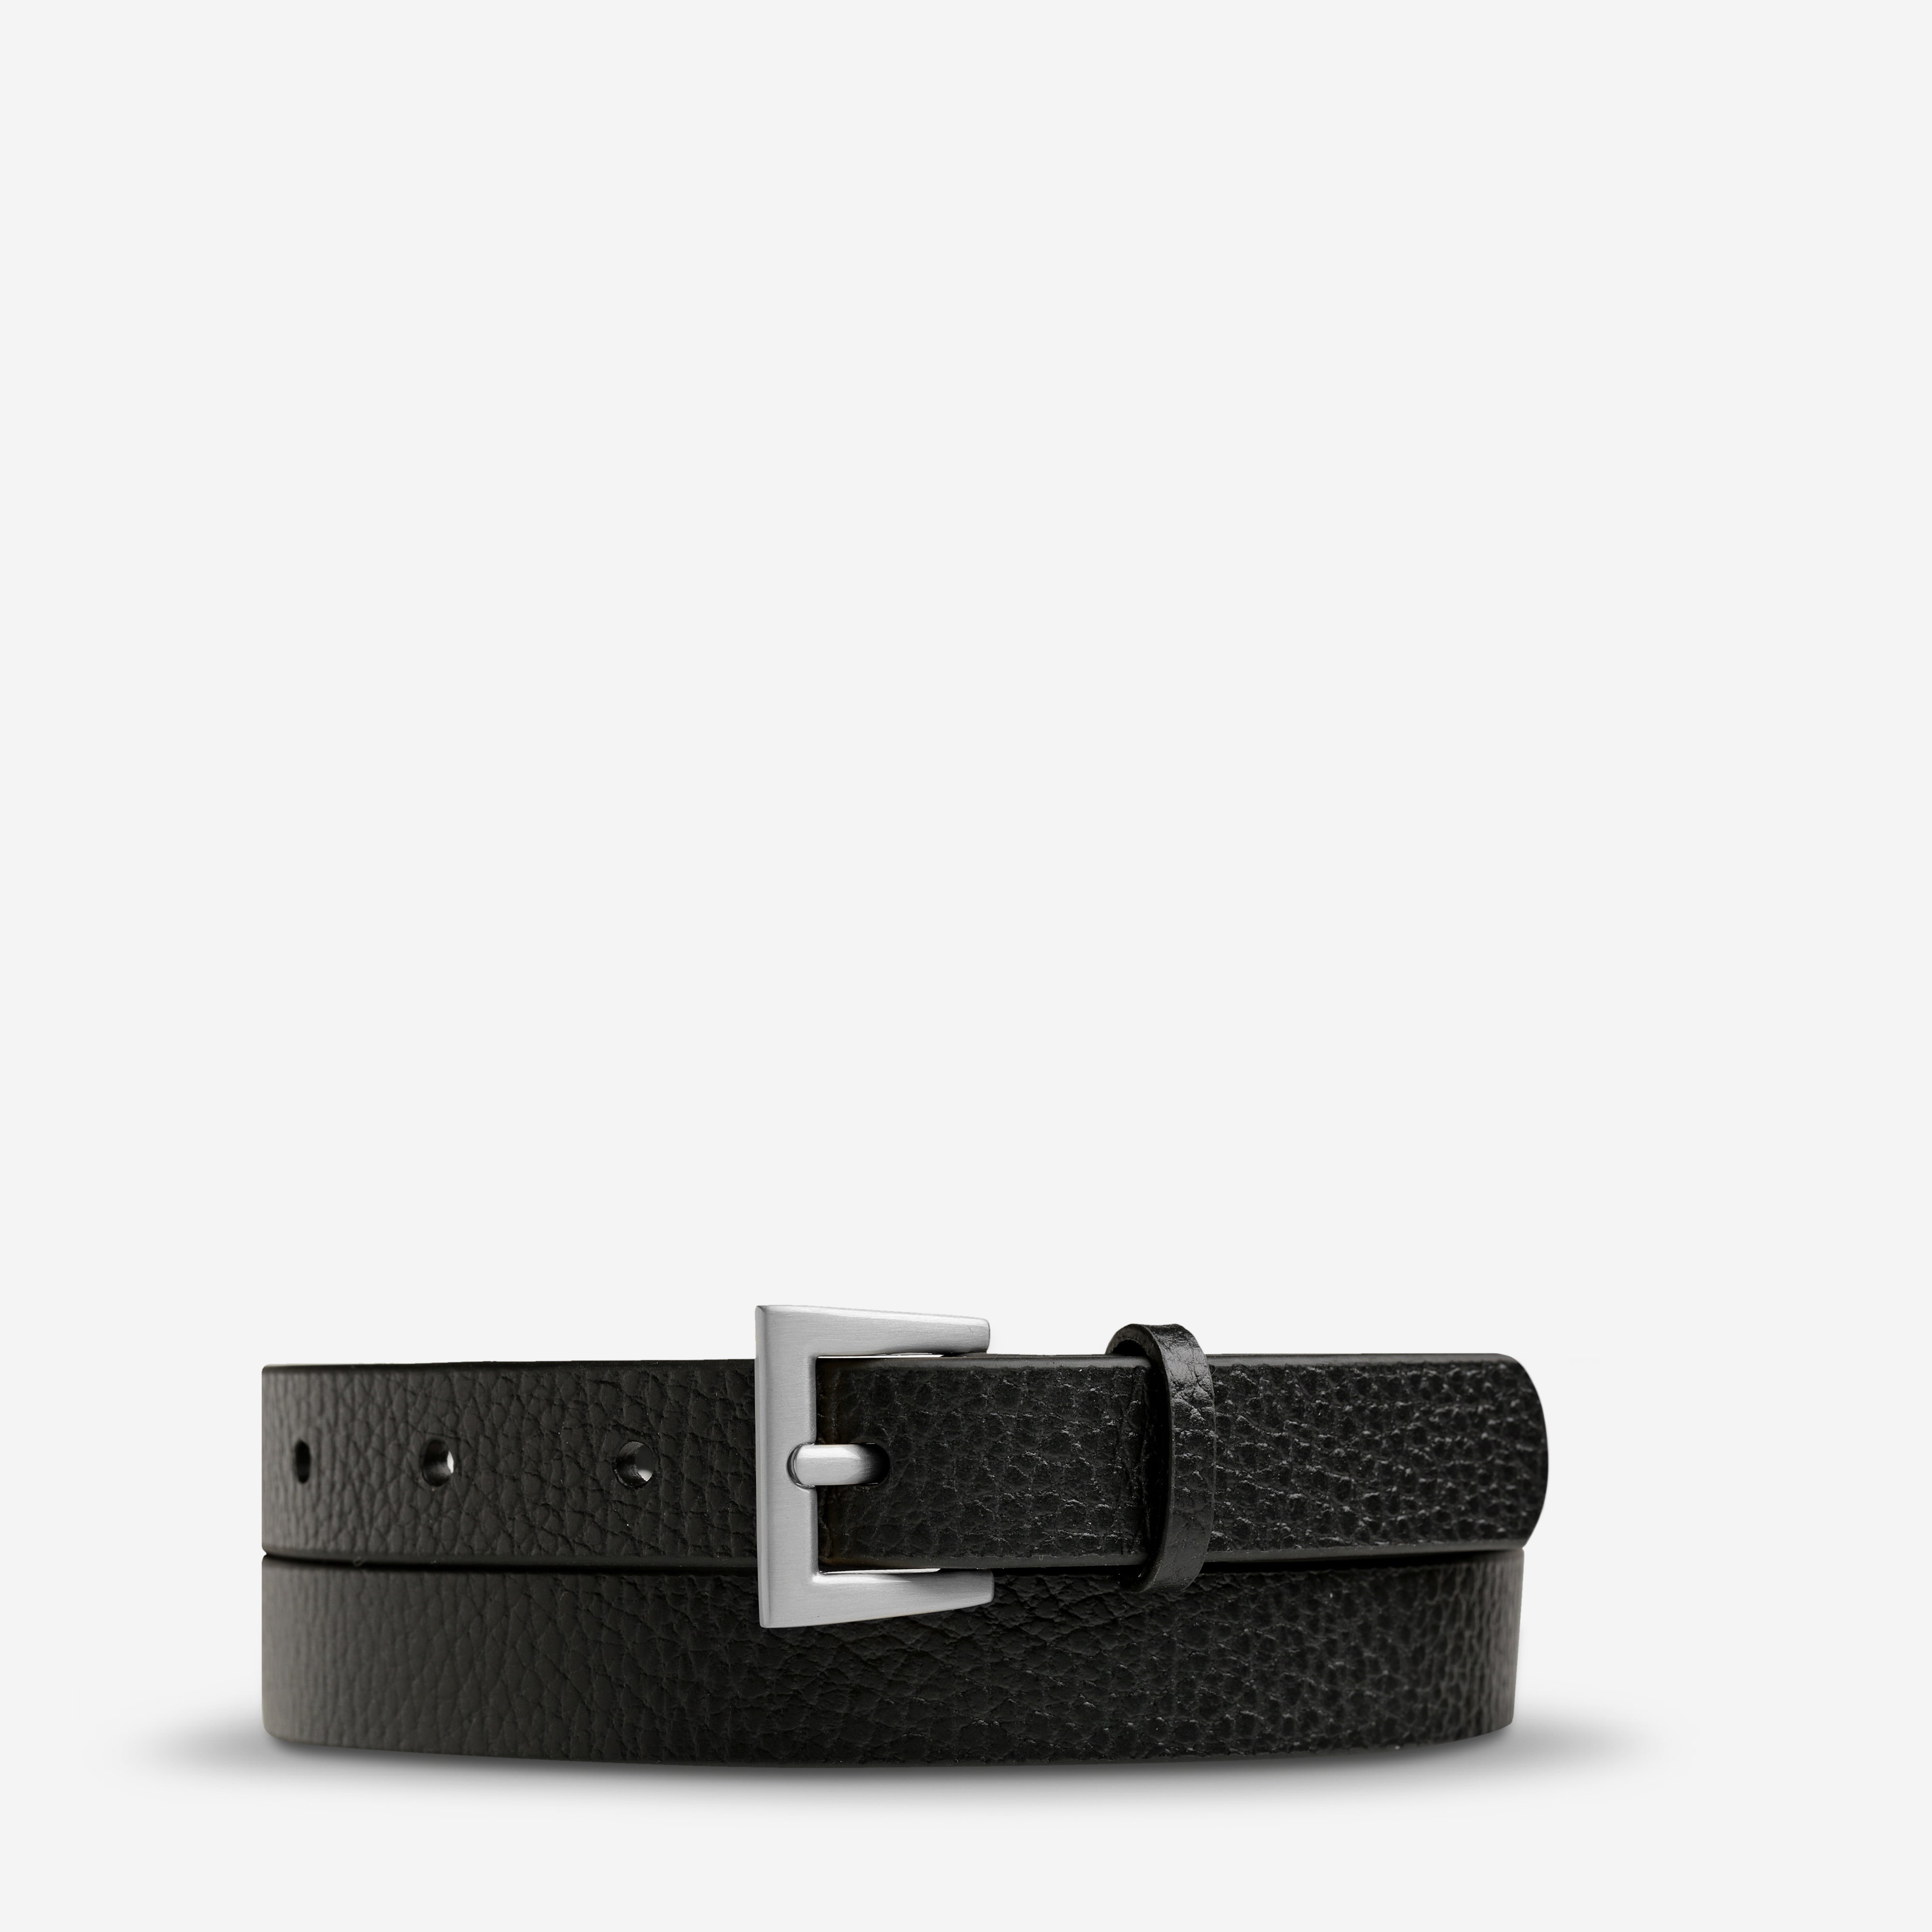 Status Anxiety ‘Part of Me’ Women's Leather Belt Black / Silver